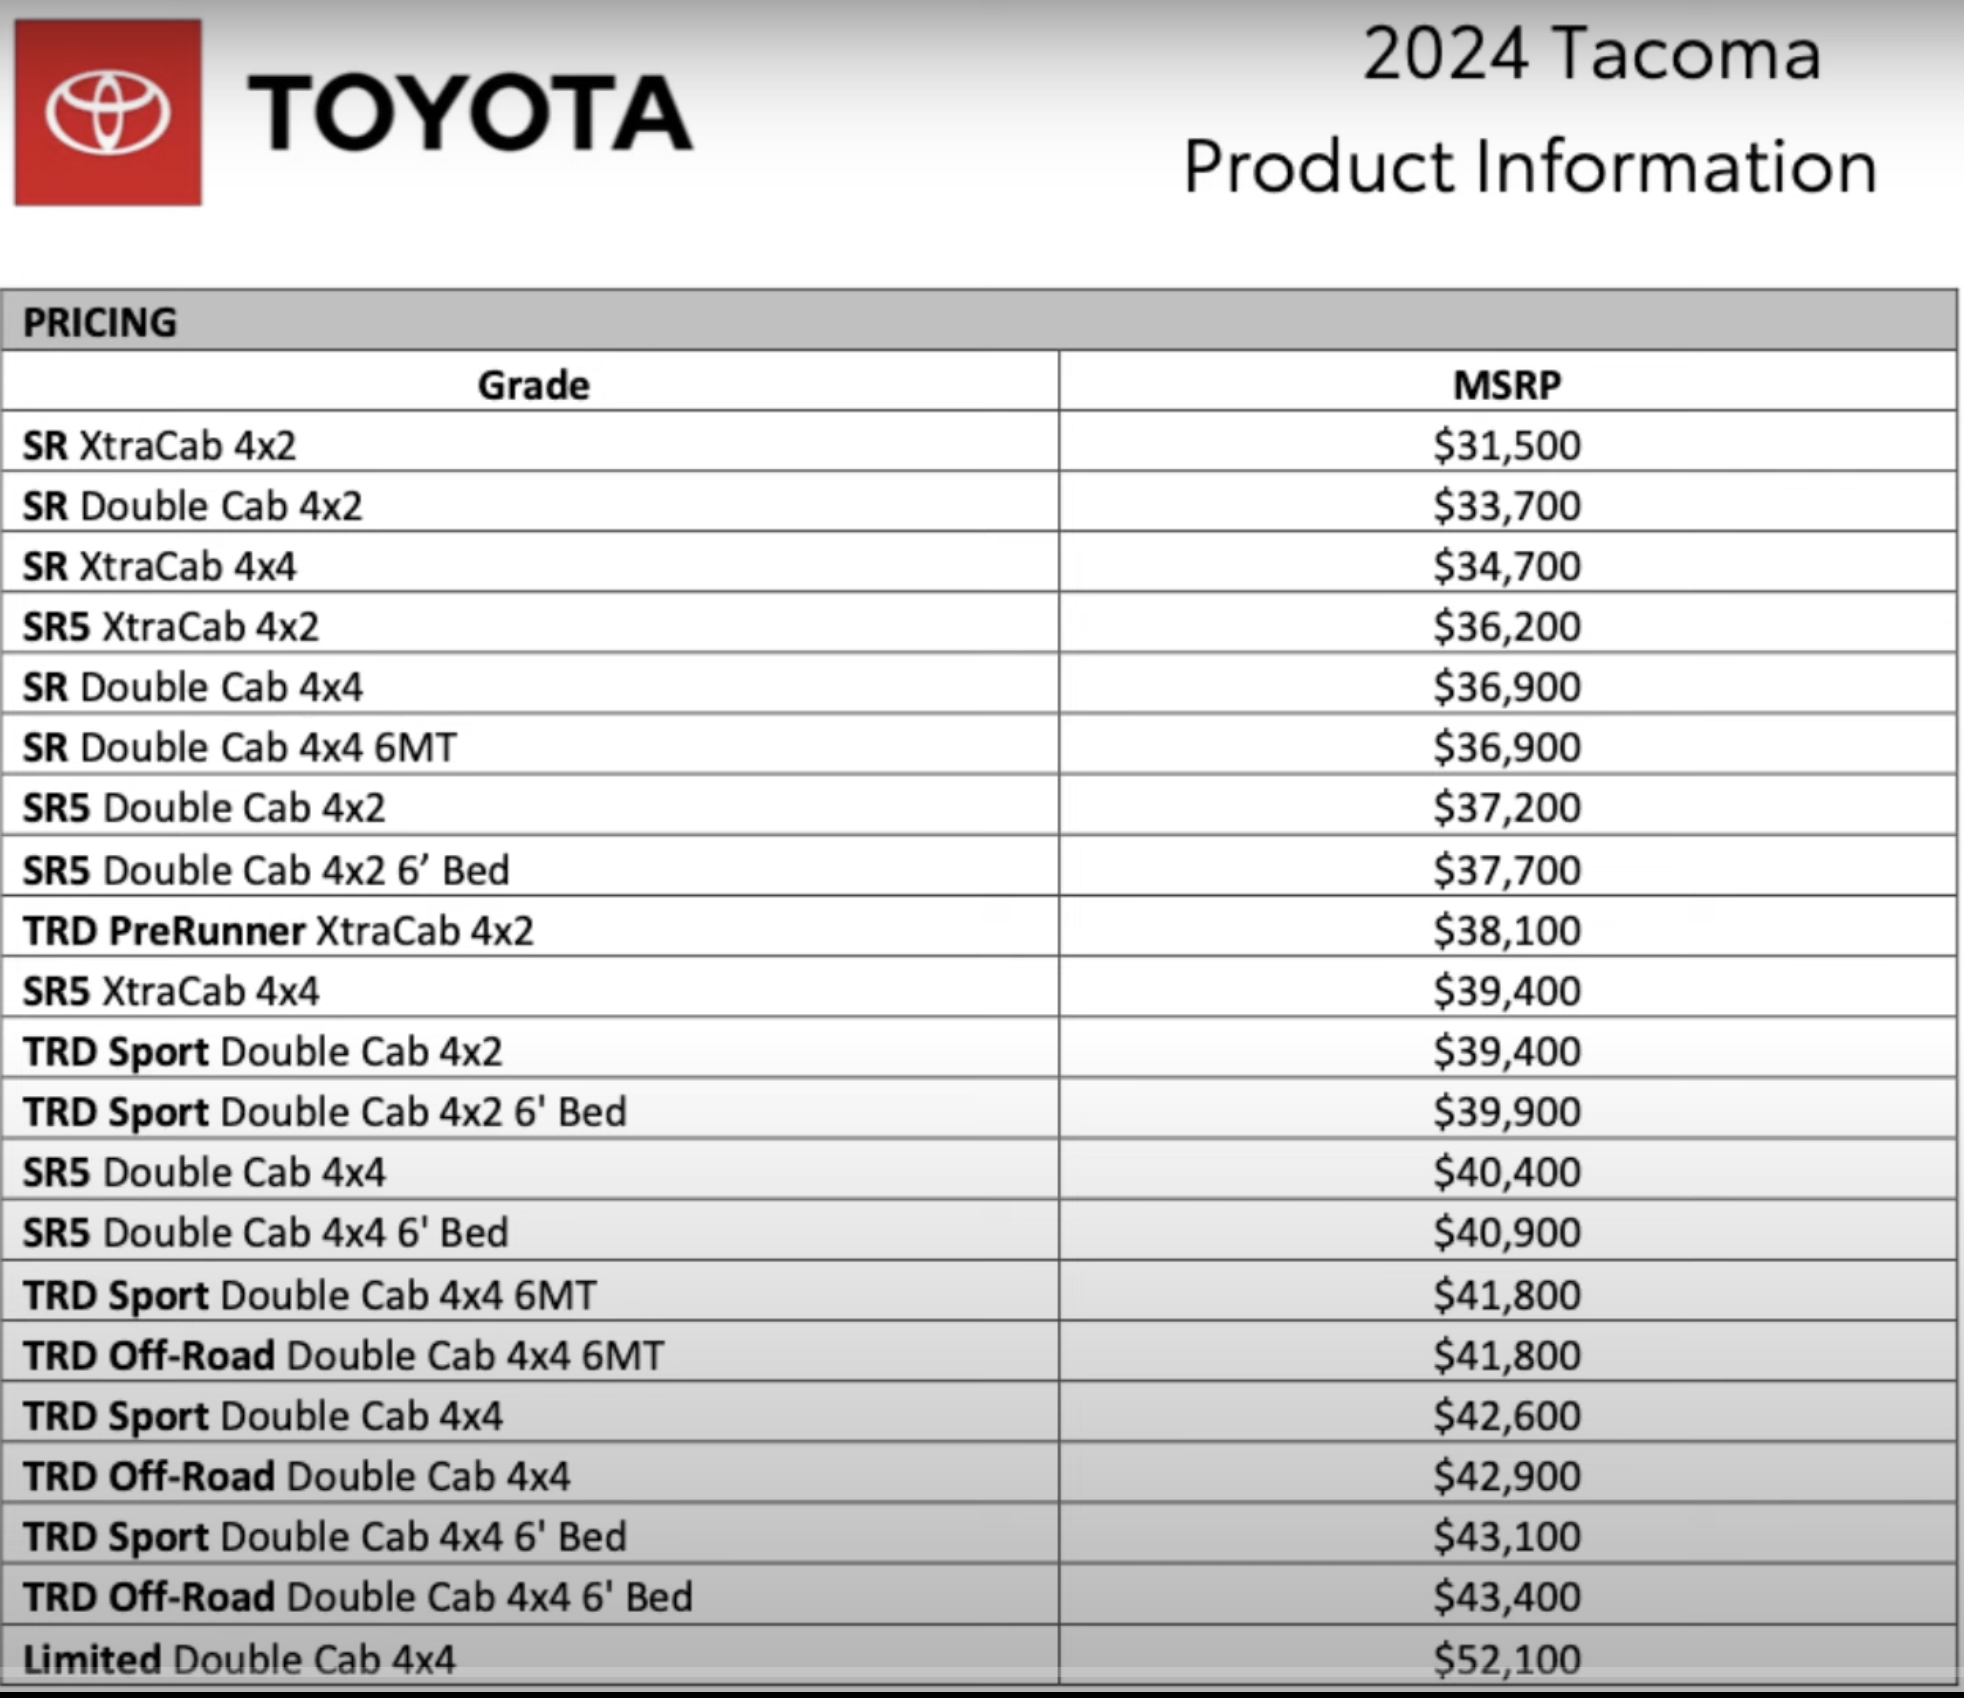 2024 Tacoma Official: 2024 Tacoma Pricing and MPG Revealed! 1701174786493